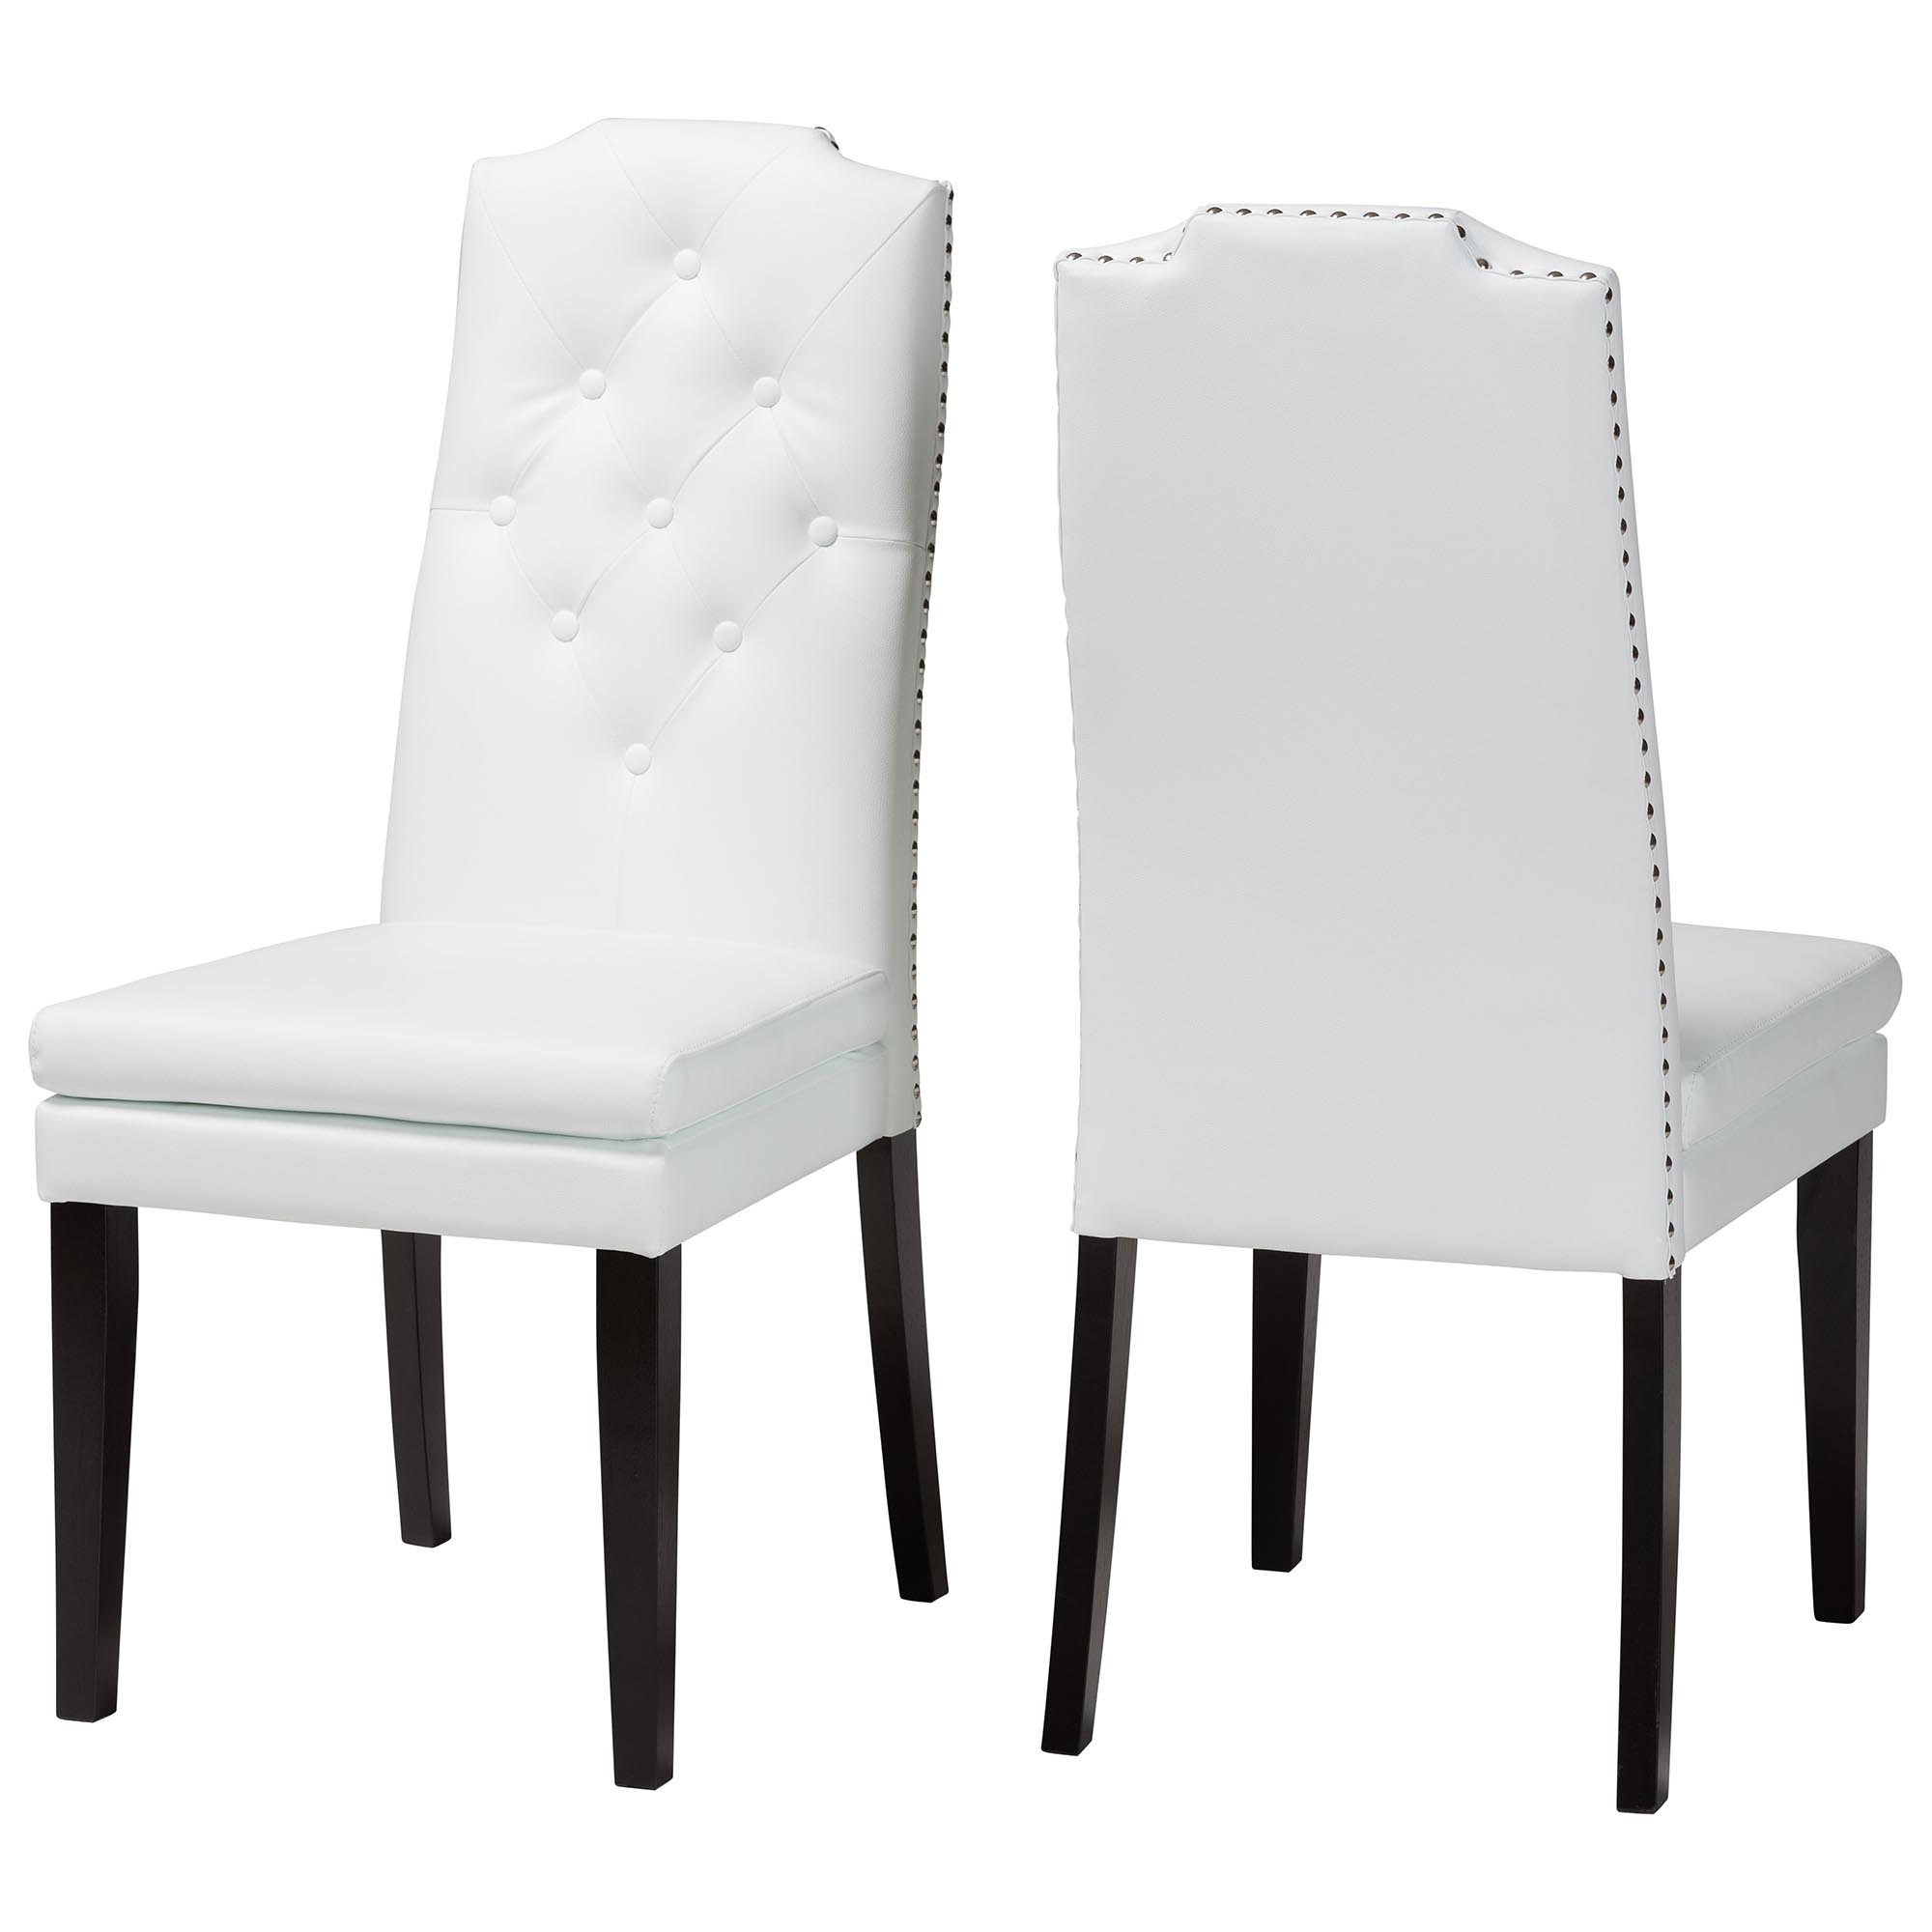 Baxton Studio Dylin Modern and Contemporary White Faux Leather Button-Tufted Nail heads Trim Dining Chair Affordable modern furniture in Chicago, Classic Dining Chair, Modern Chair, cheap Chair,